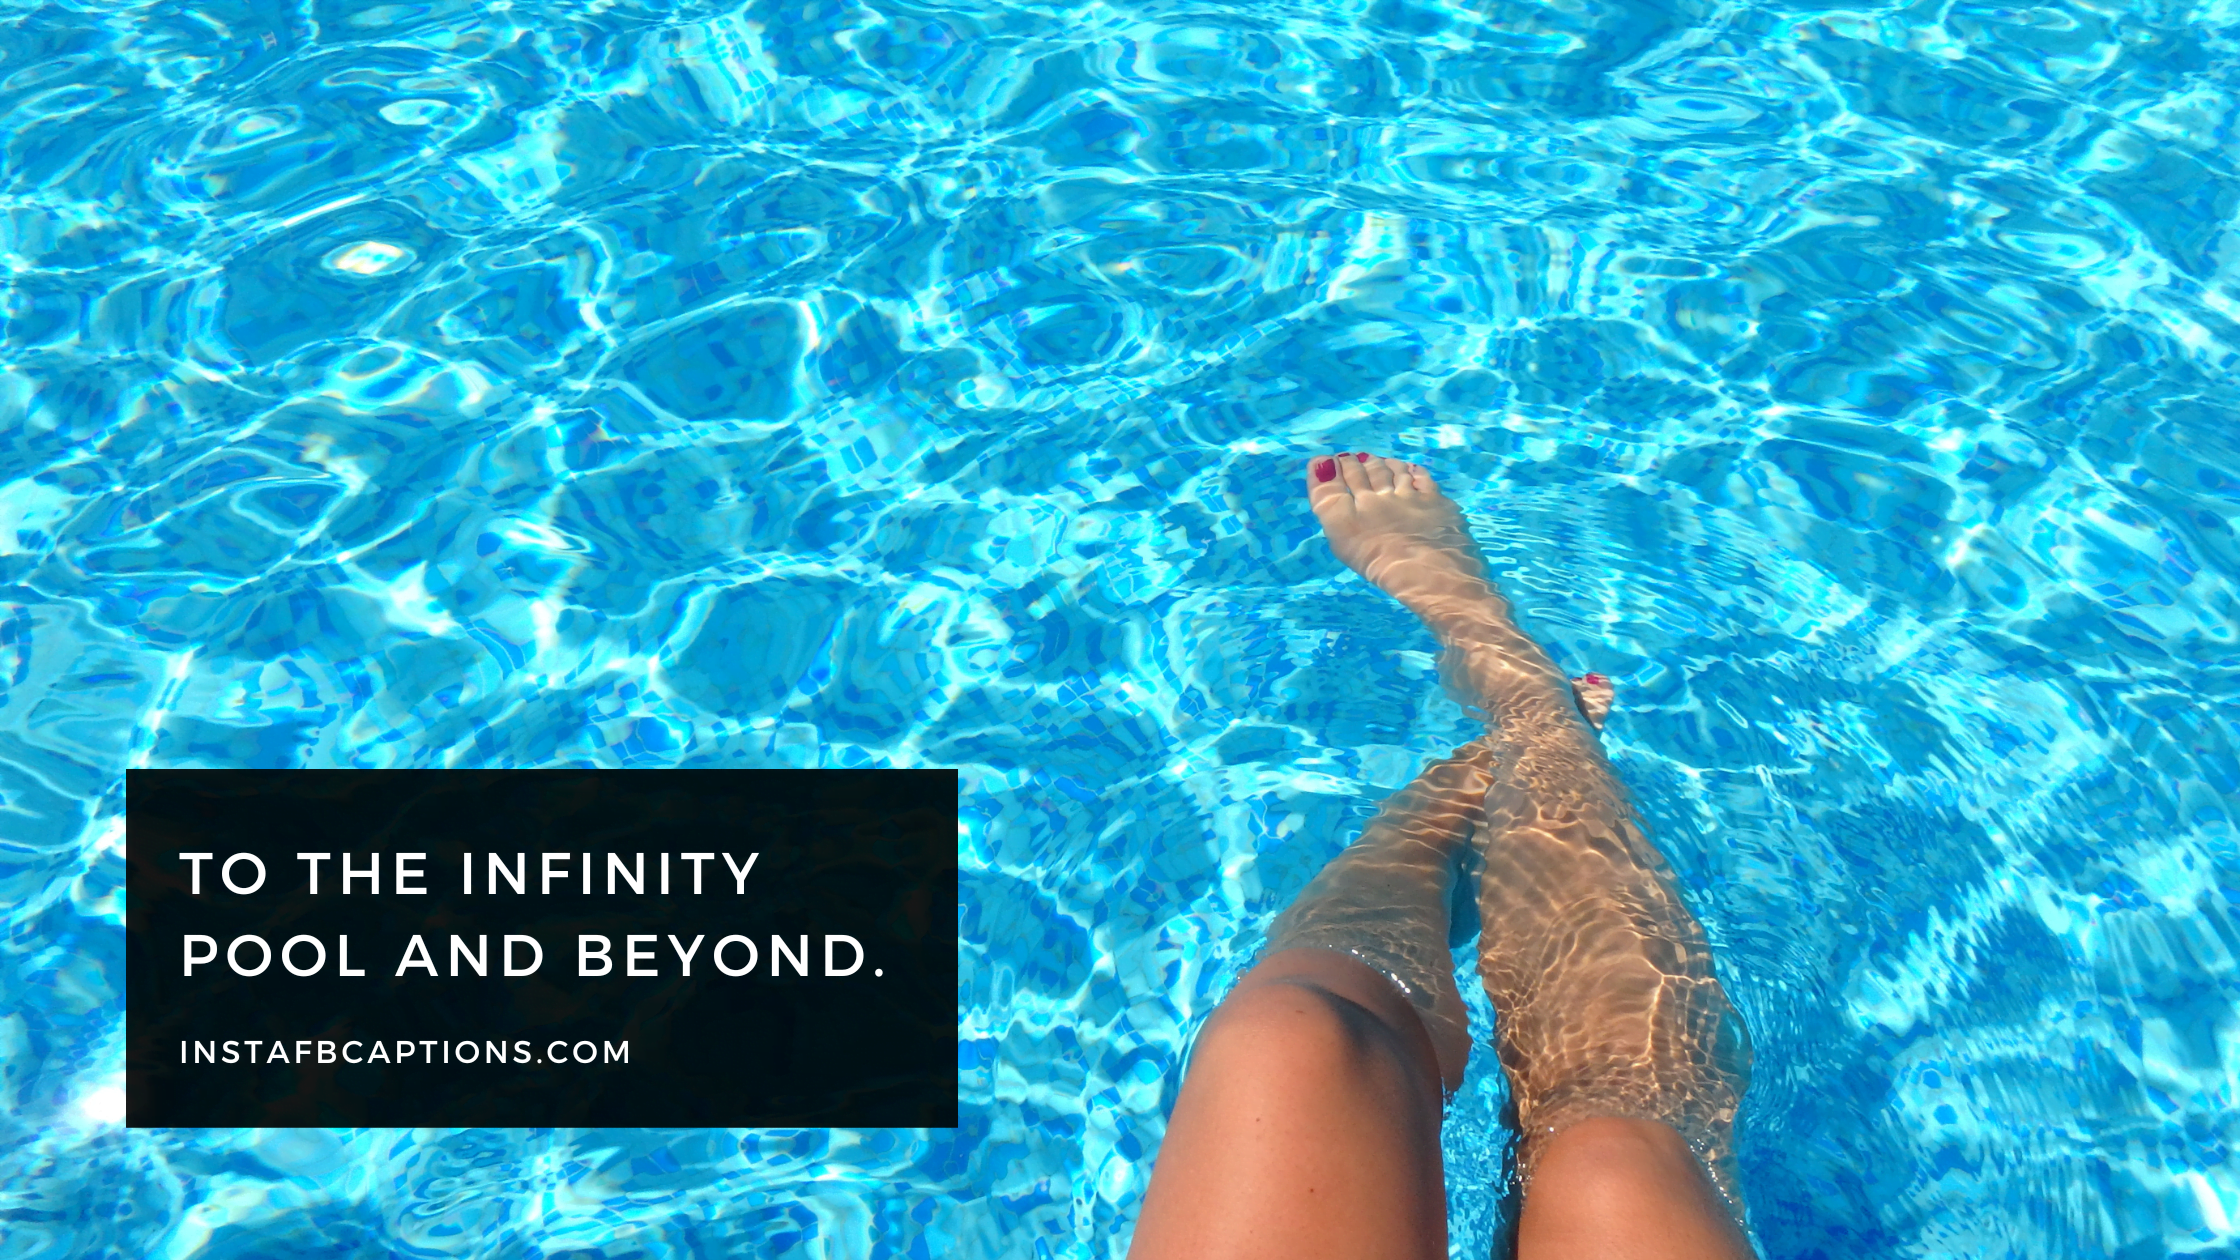 Infinity Pool Captions  - Infinity Pool Captions - 97 Pool Captions for Instagram in 2022